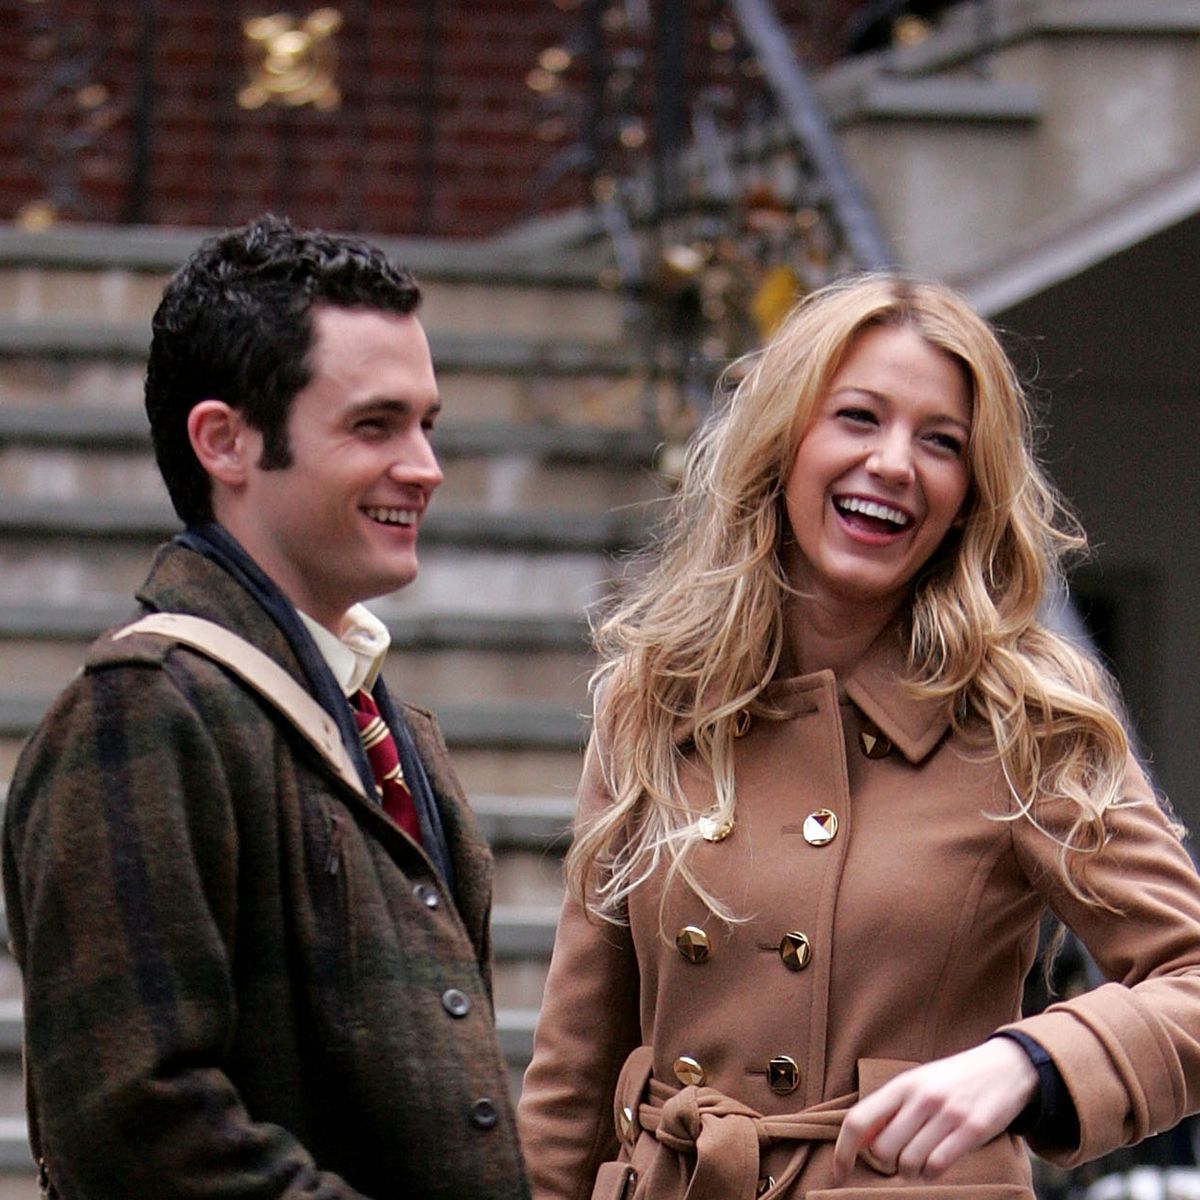 Blake Lively: latest news, photos and more on the Gossip Girl star